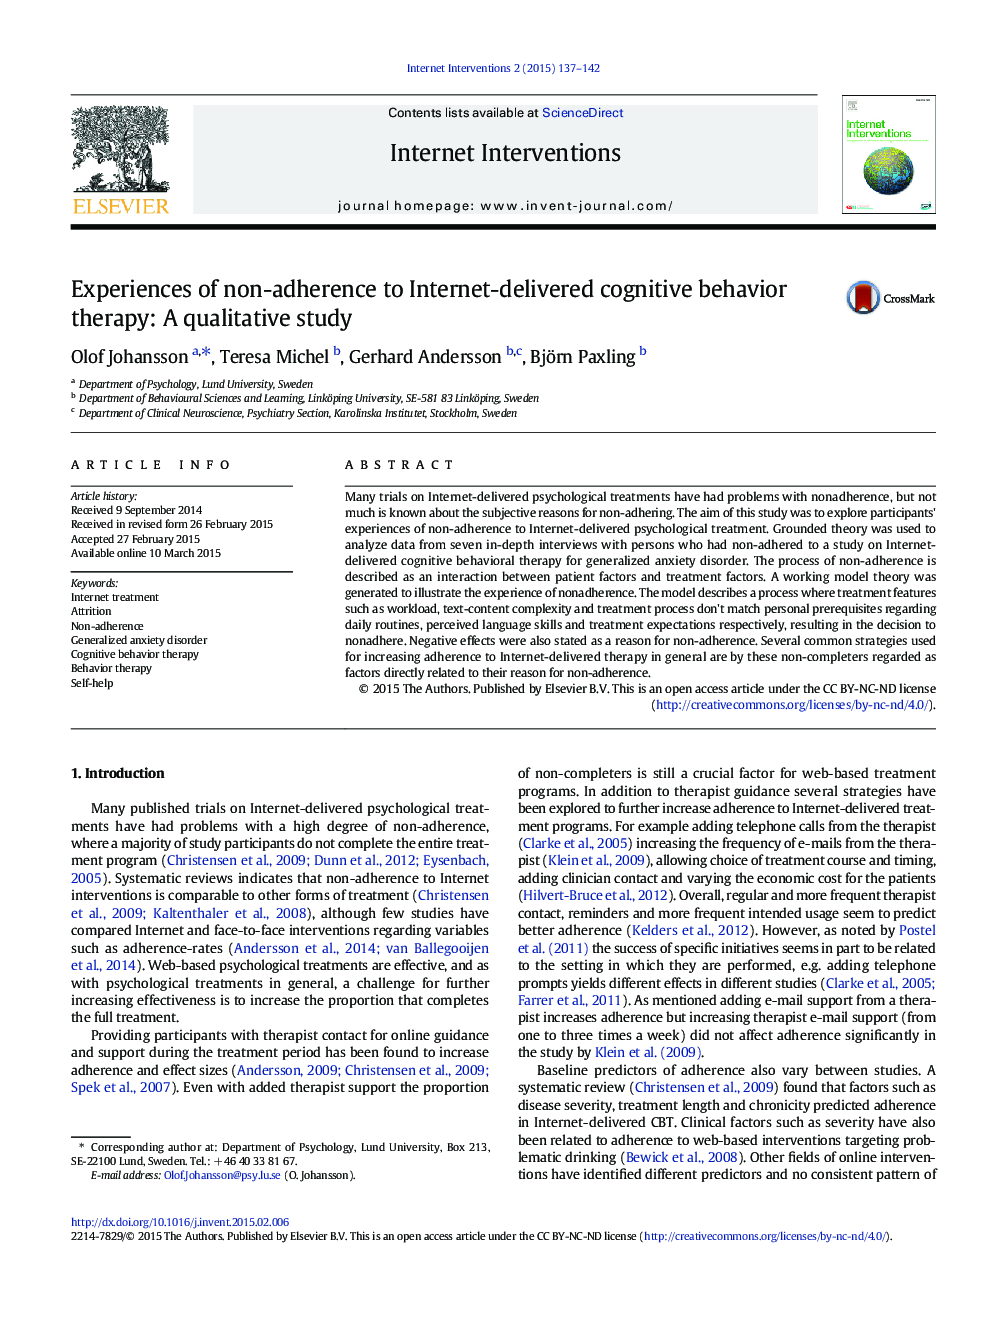 Experiences of non-adherence to Internet-delivered cognitive behavior therapy: A qualitative study